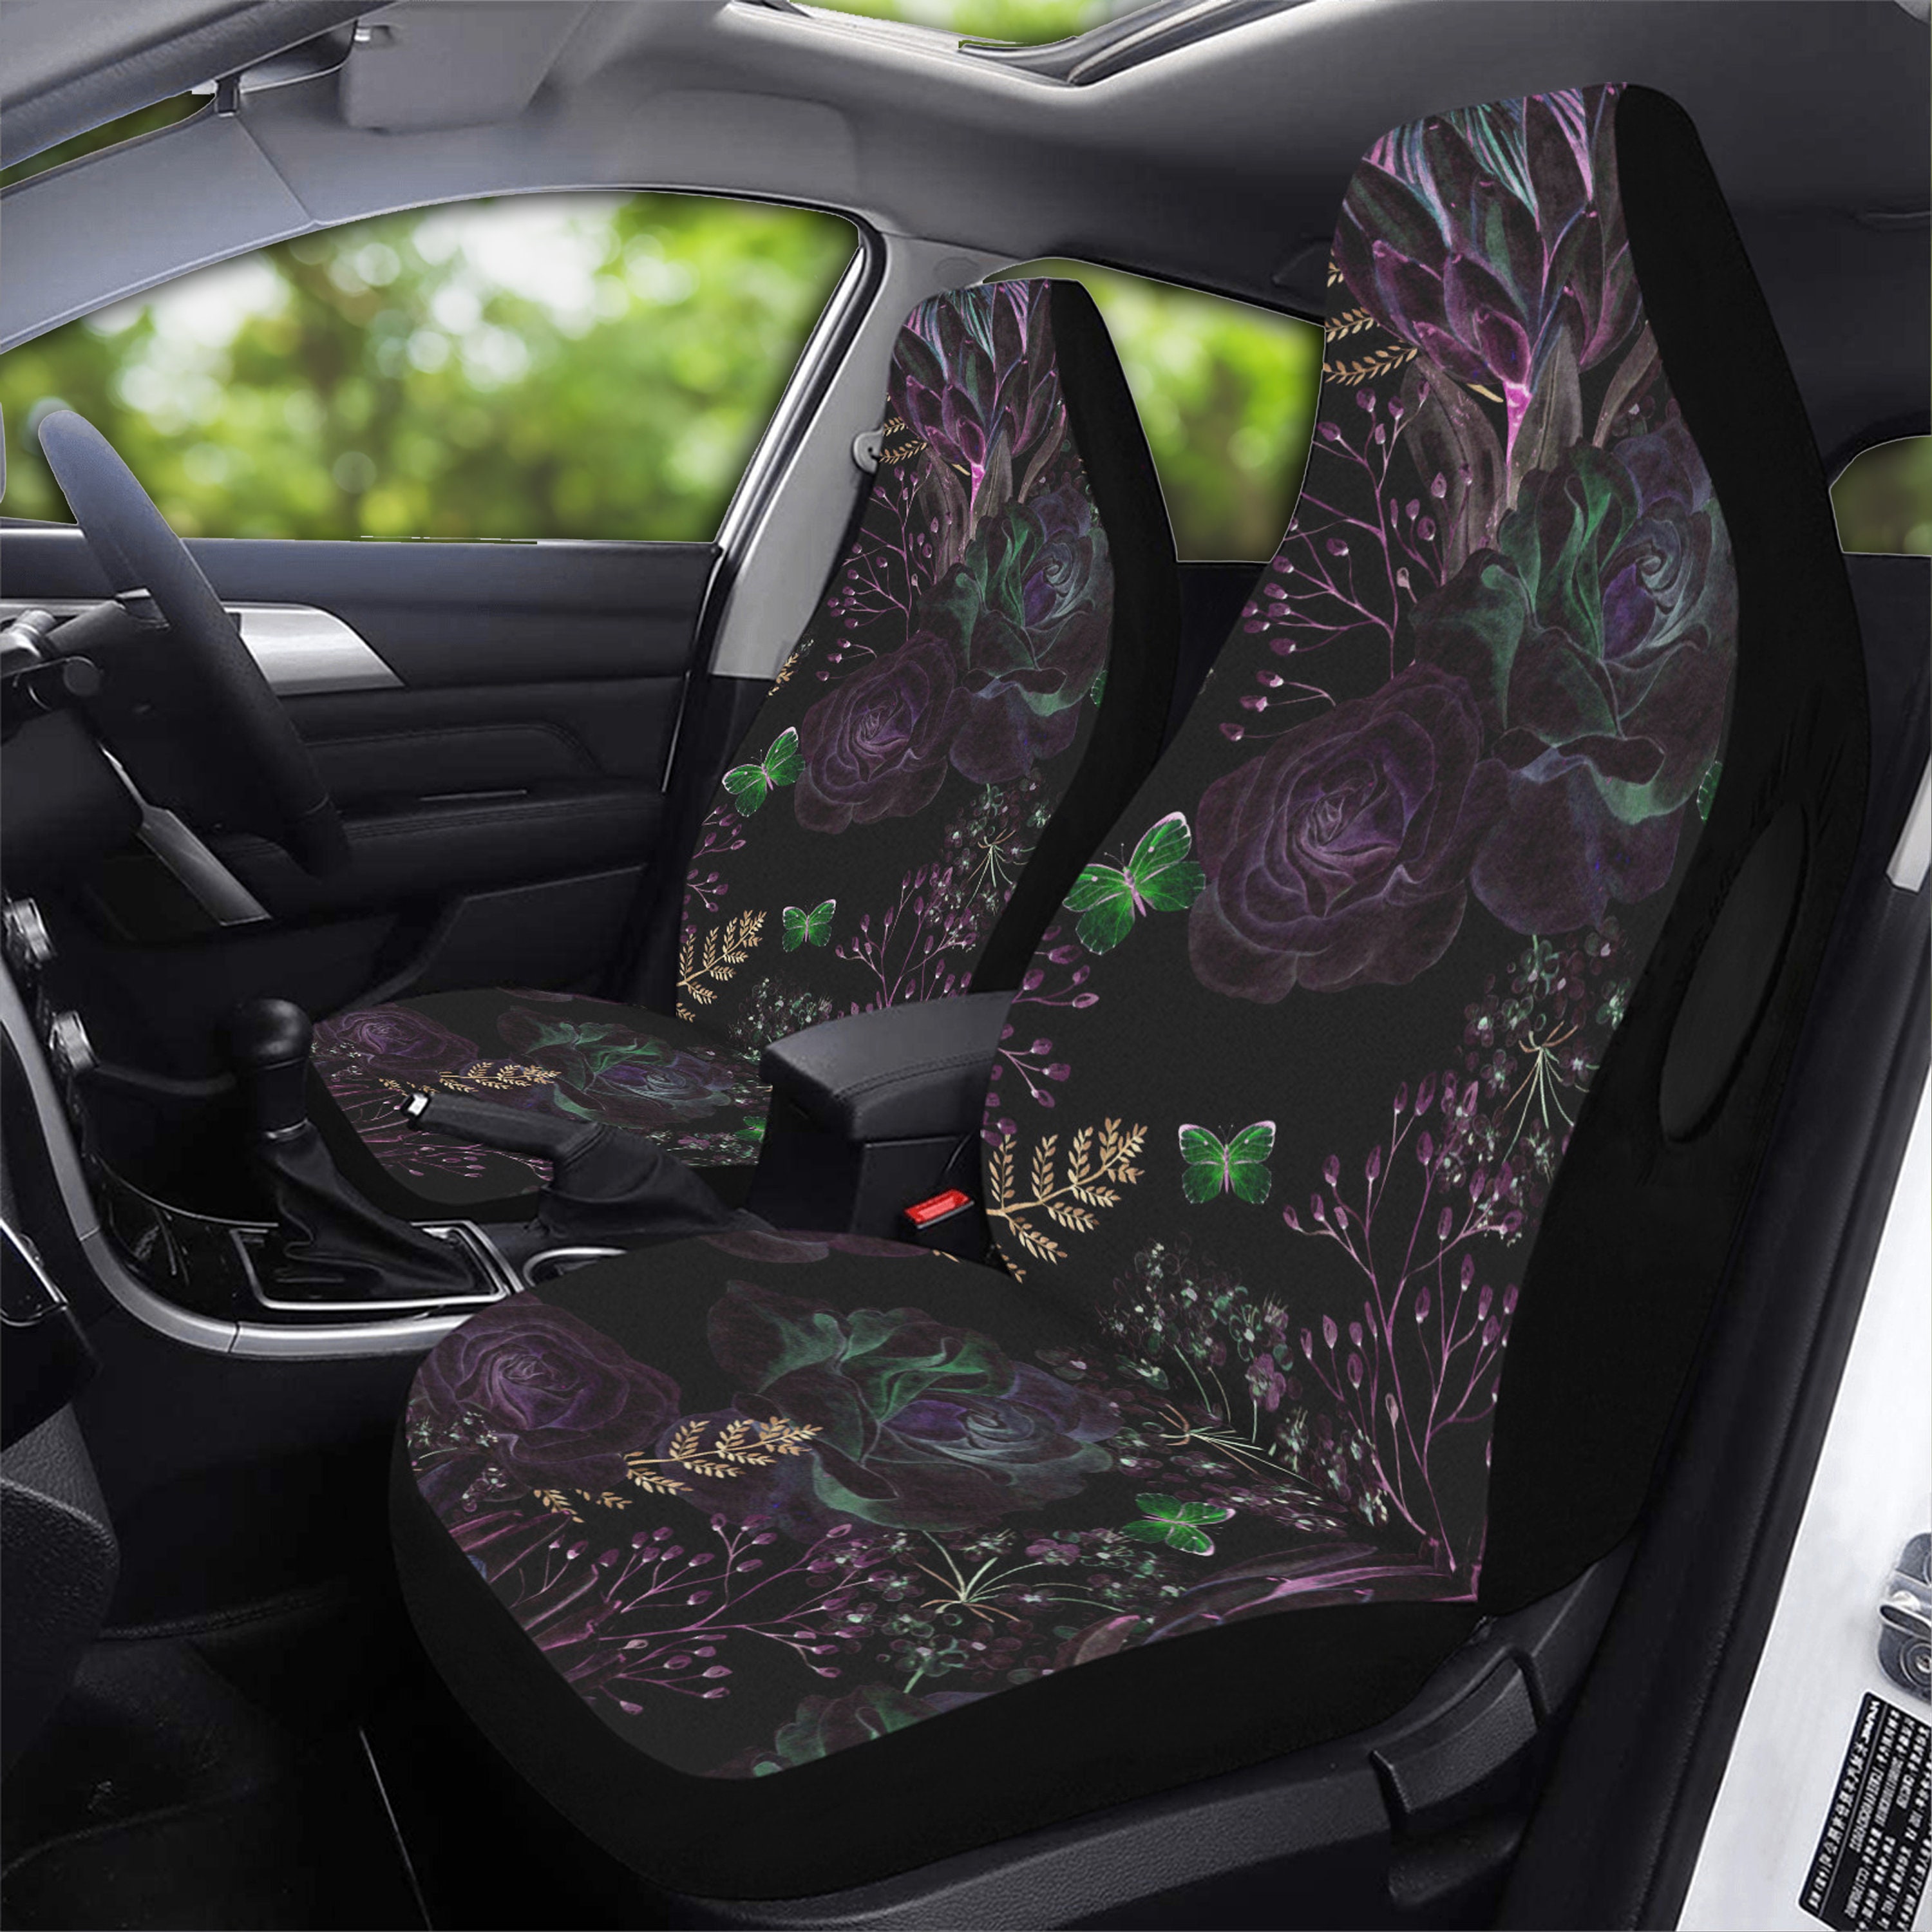 Discover Dark Roses Boho Witch Car Seat Covers, Cottagecore Cute Dark Floral Front Bucket Seat Cover For Car Vehicle, Nature seat cover